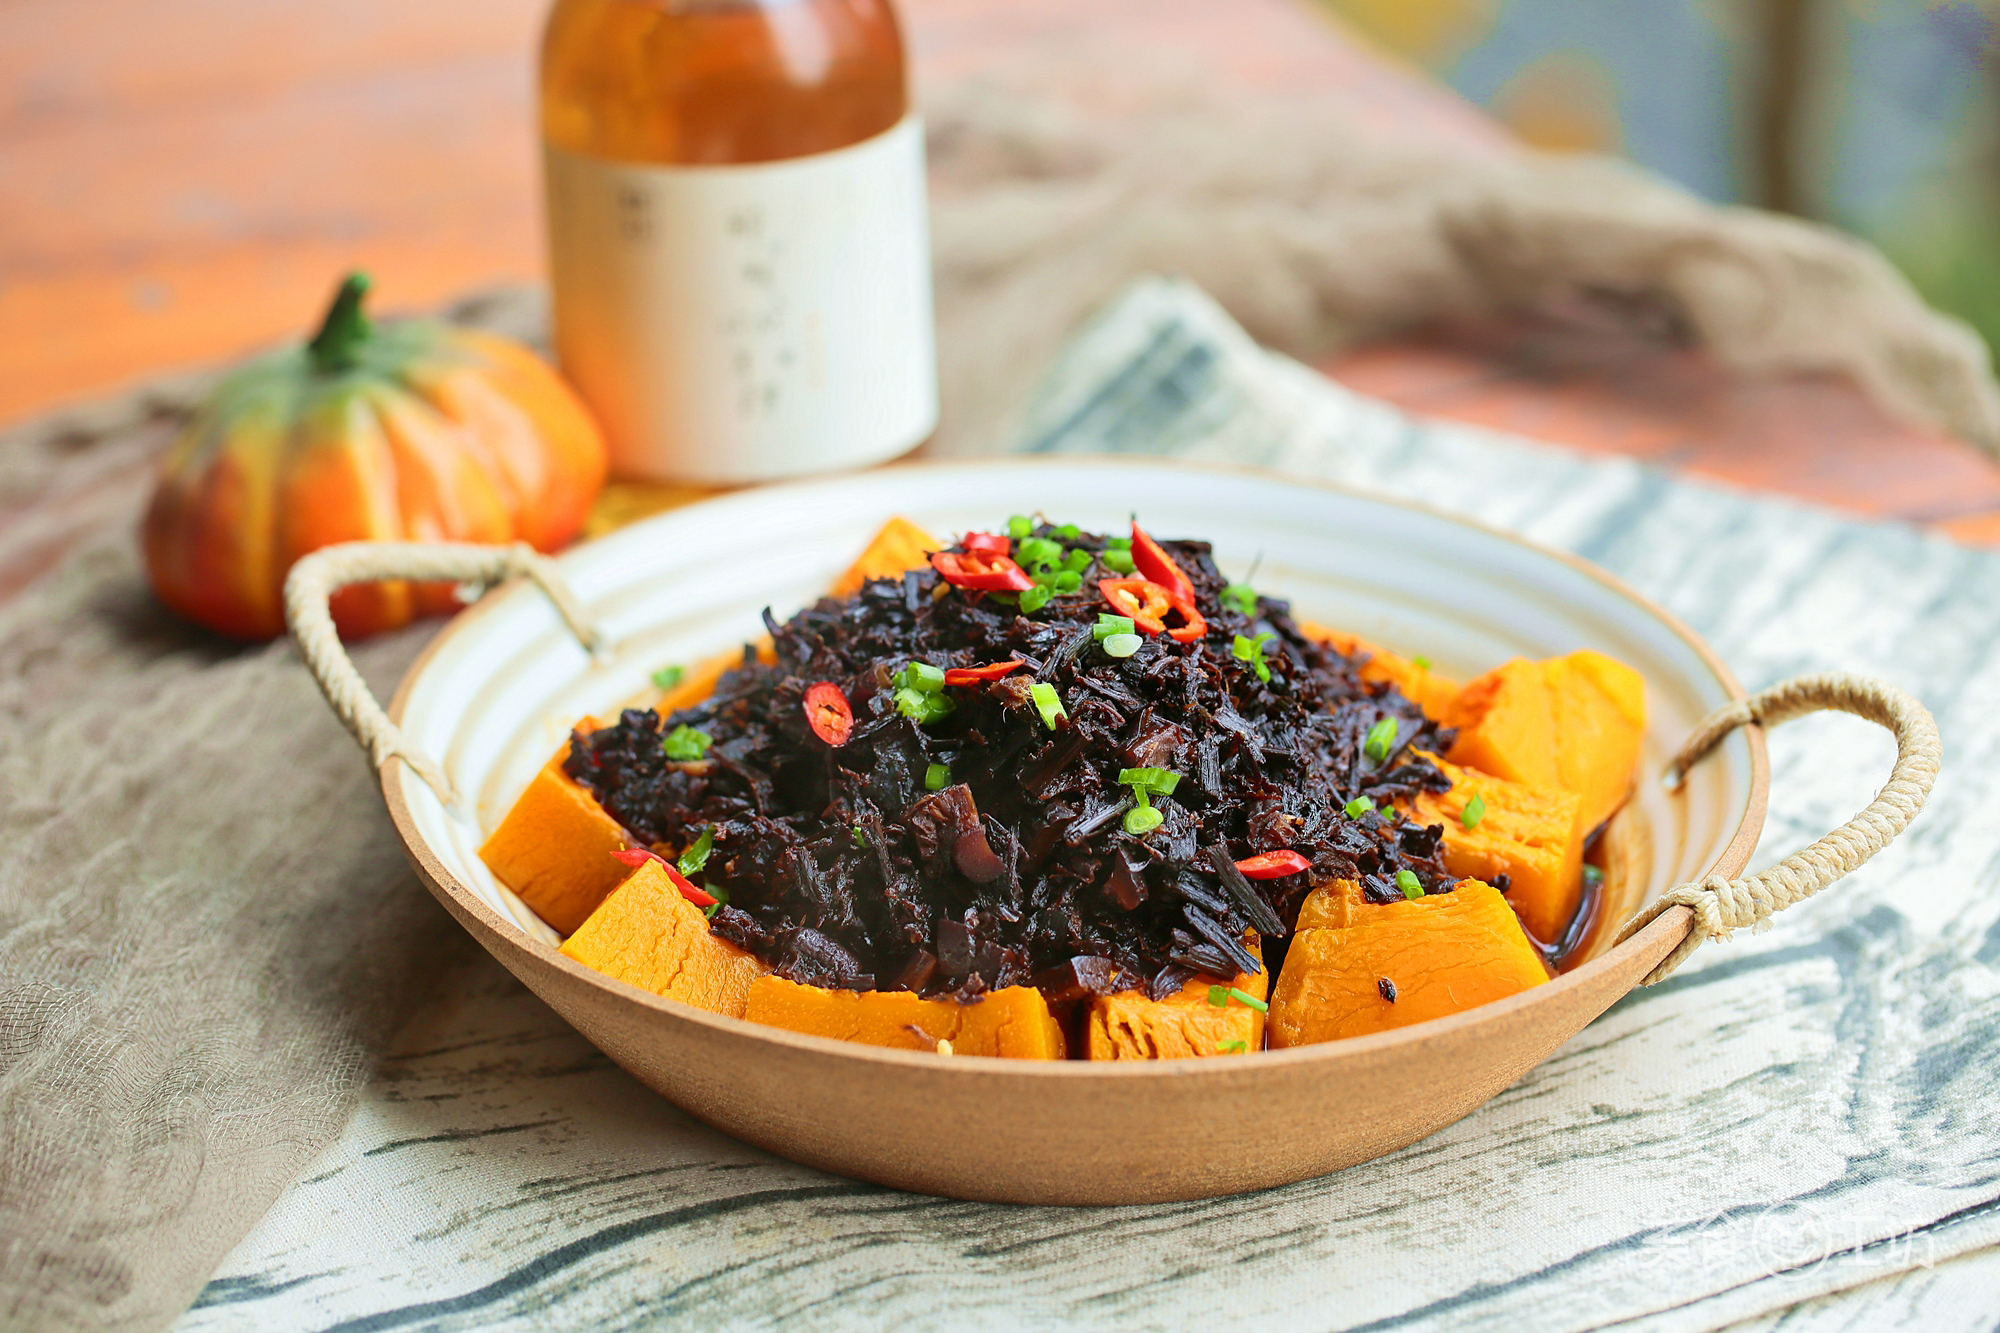 
Pumpkin of prune dish evaporate - prune dish buckles the flesh to eat not to rise! practice